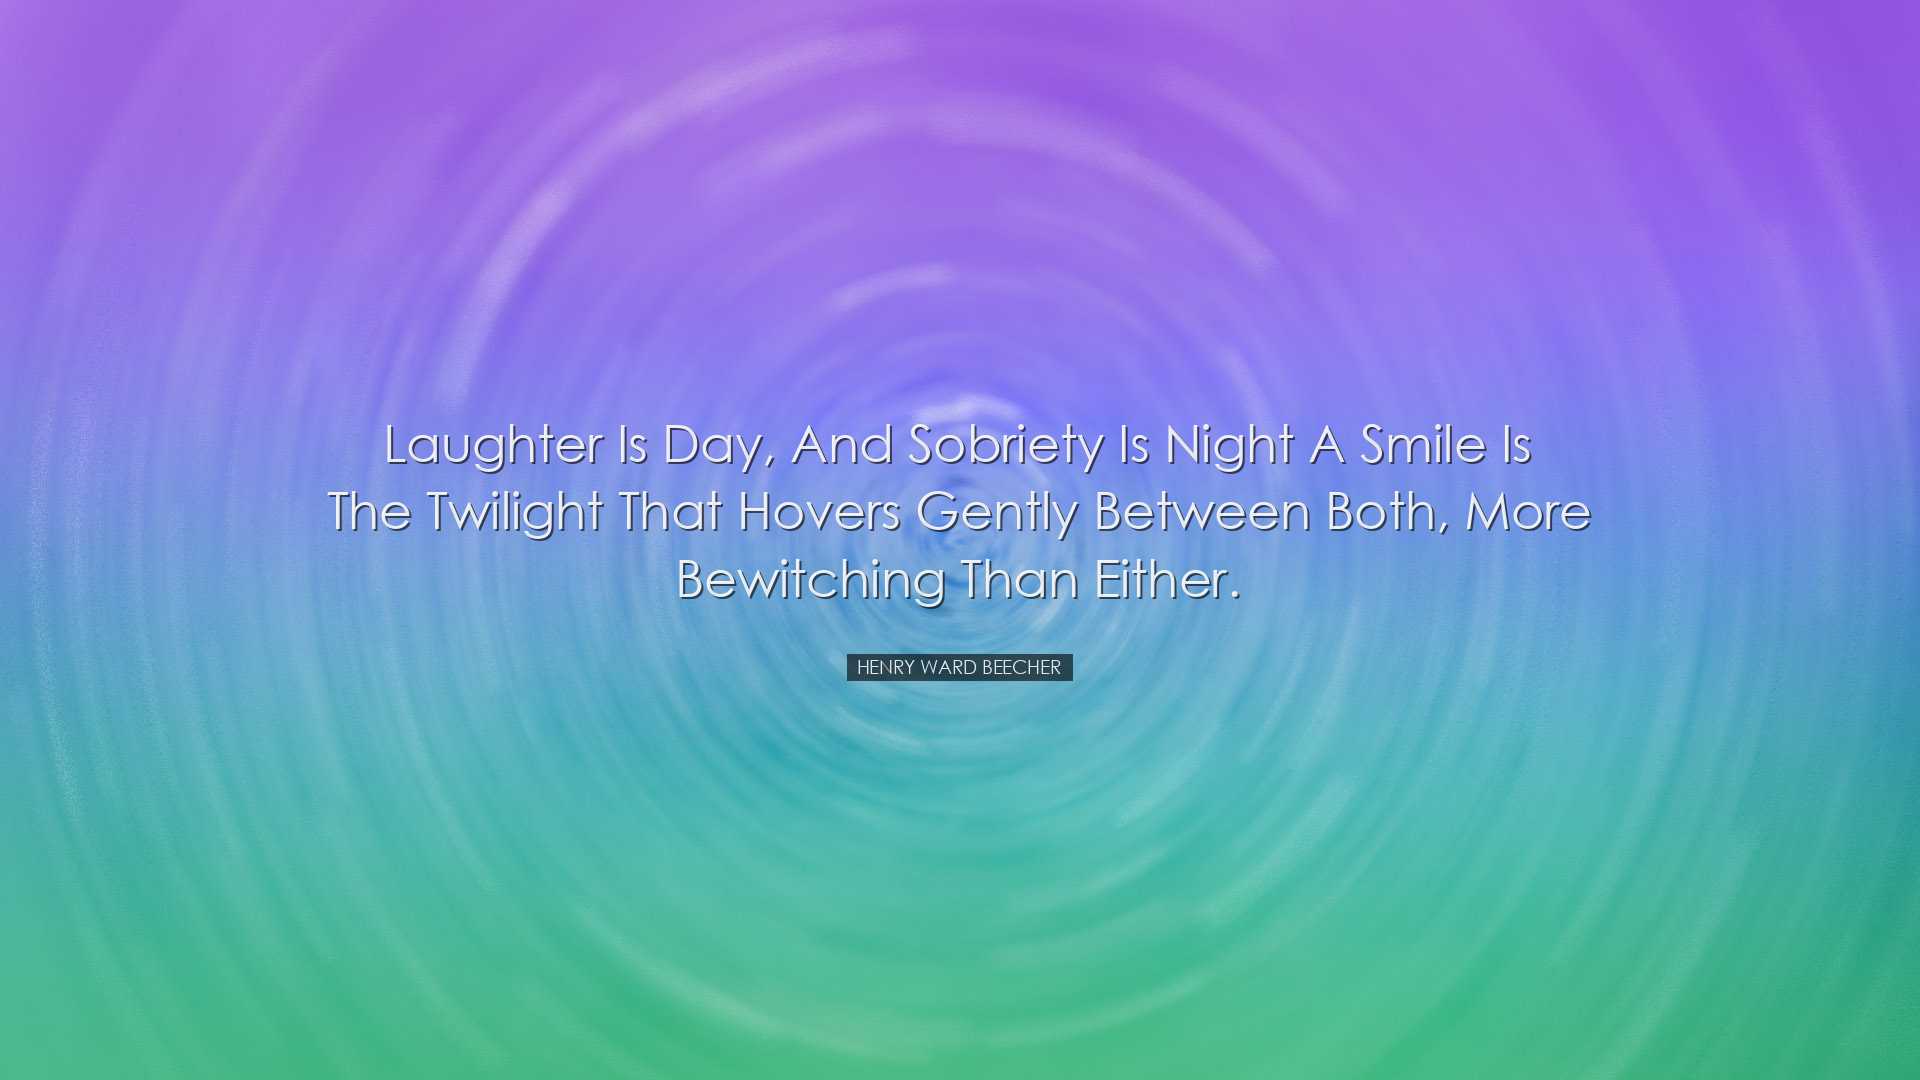 Laughter is day, and sobriety is night a smile is the twilight tha